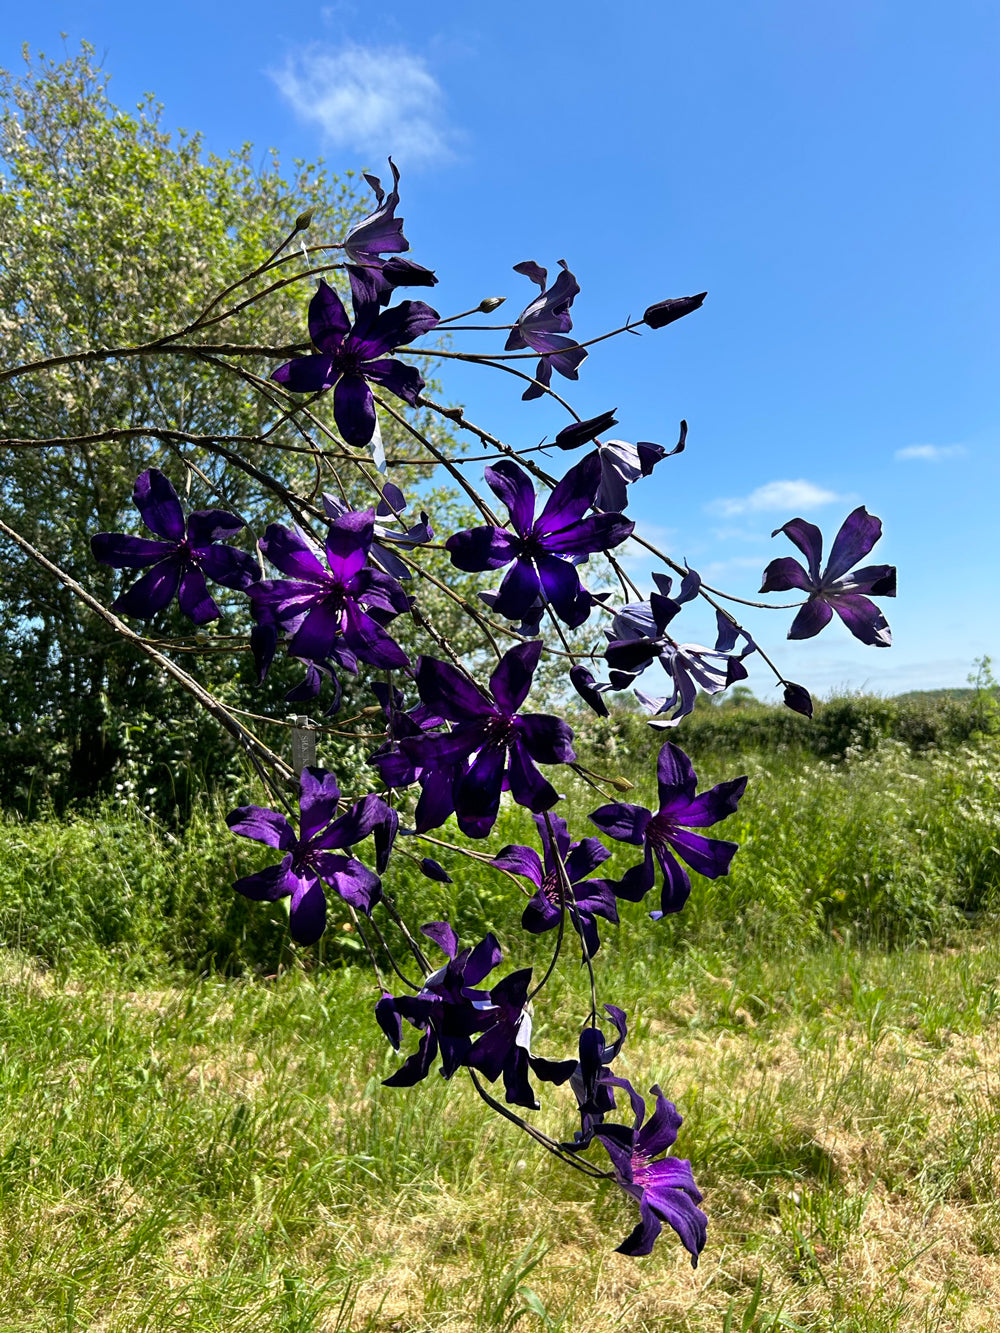 A group of faux clematis sprays, in a rich, dark purple, photographed outside in bright sunshine against the background of a meadow, trees, and a bright blue sky